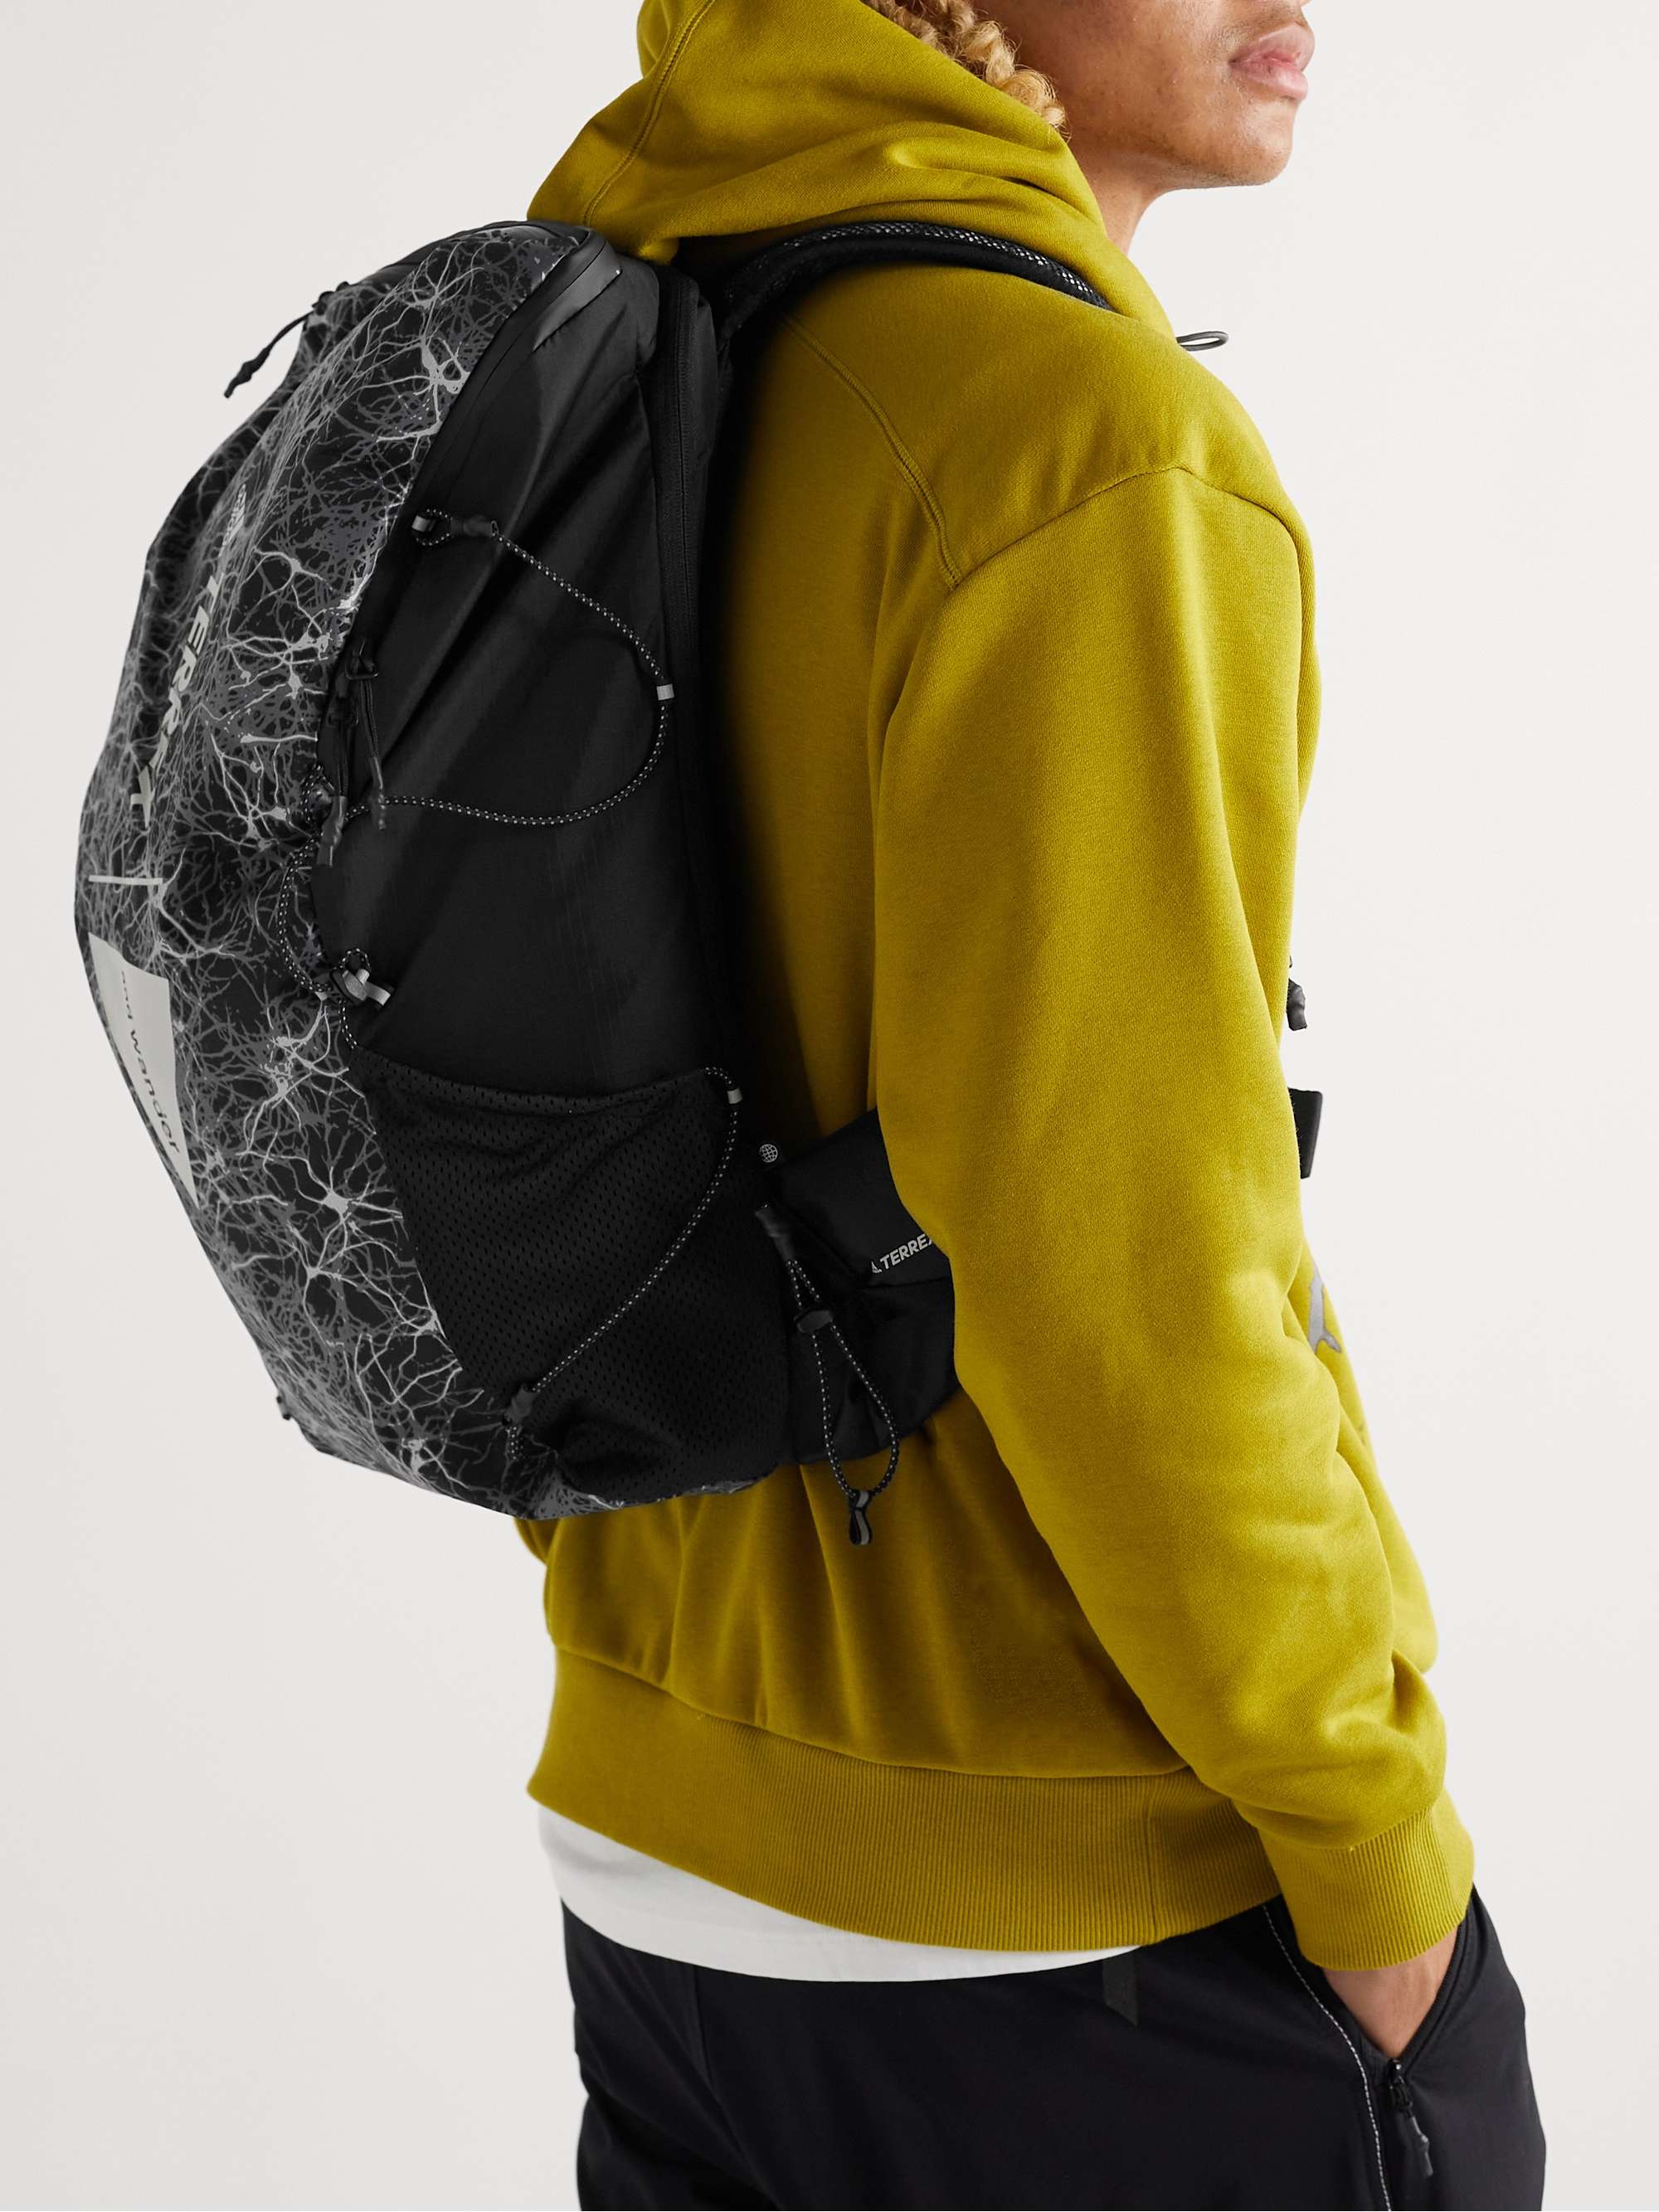 ADIDAS CONSORTIUM + And Wander TERREX Printed Shell Backpack | MR PORTER